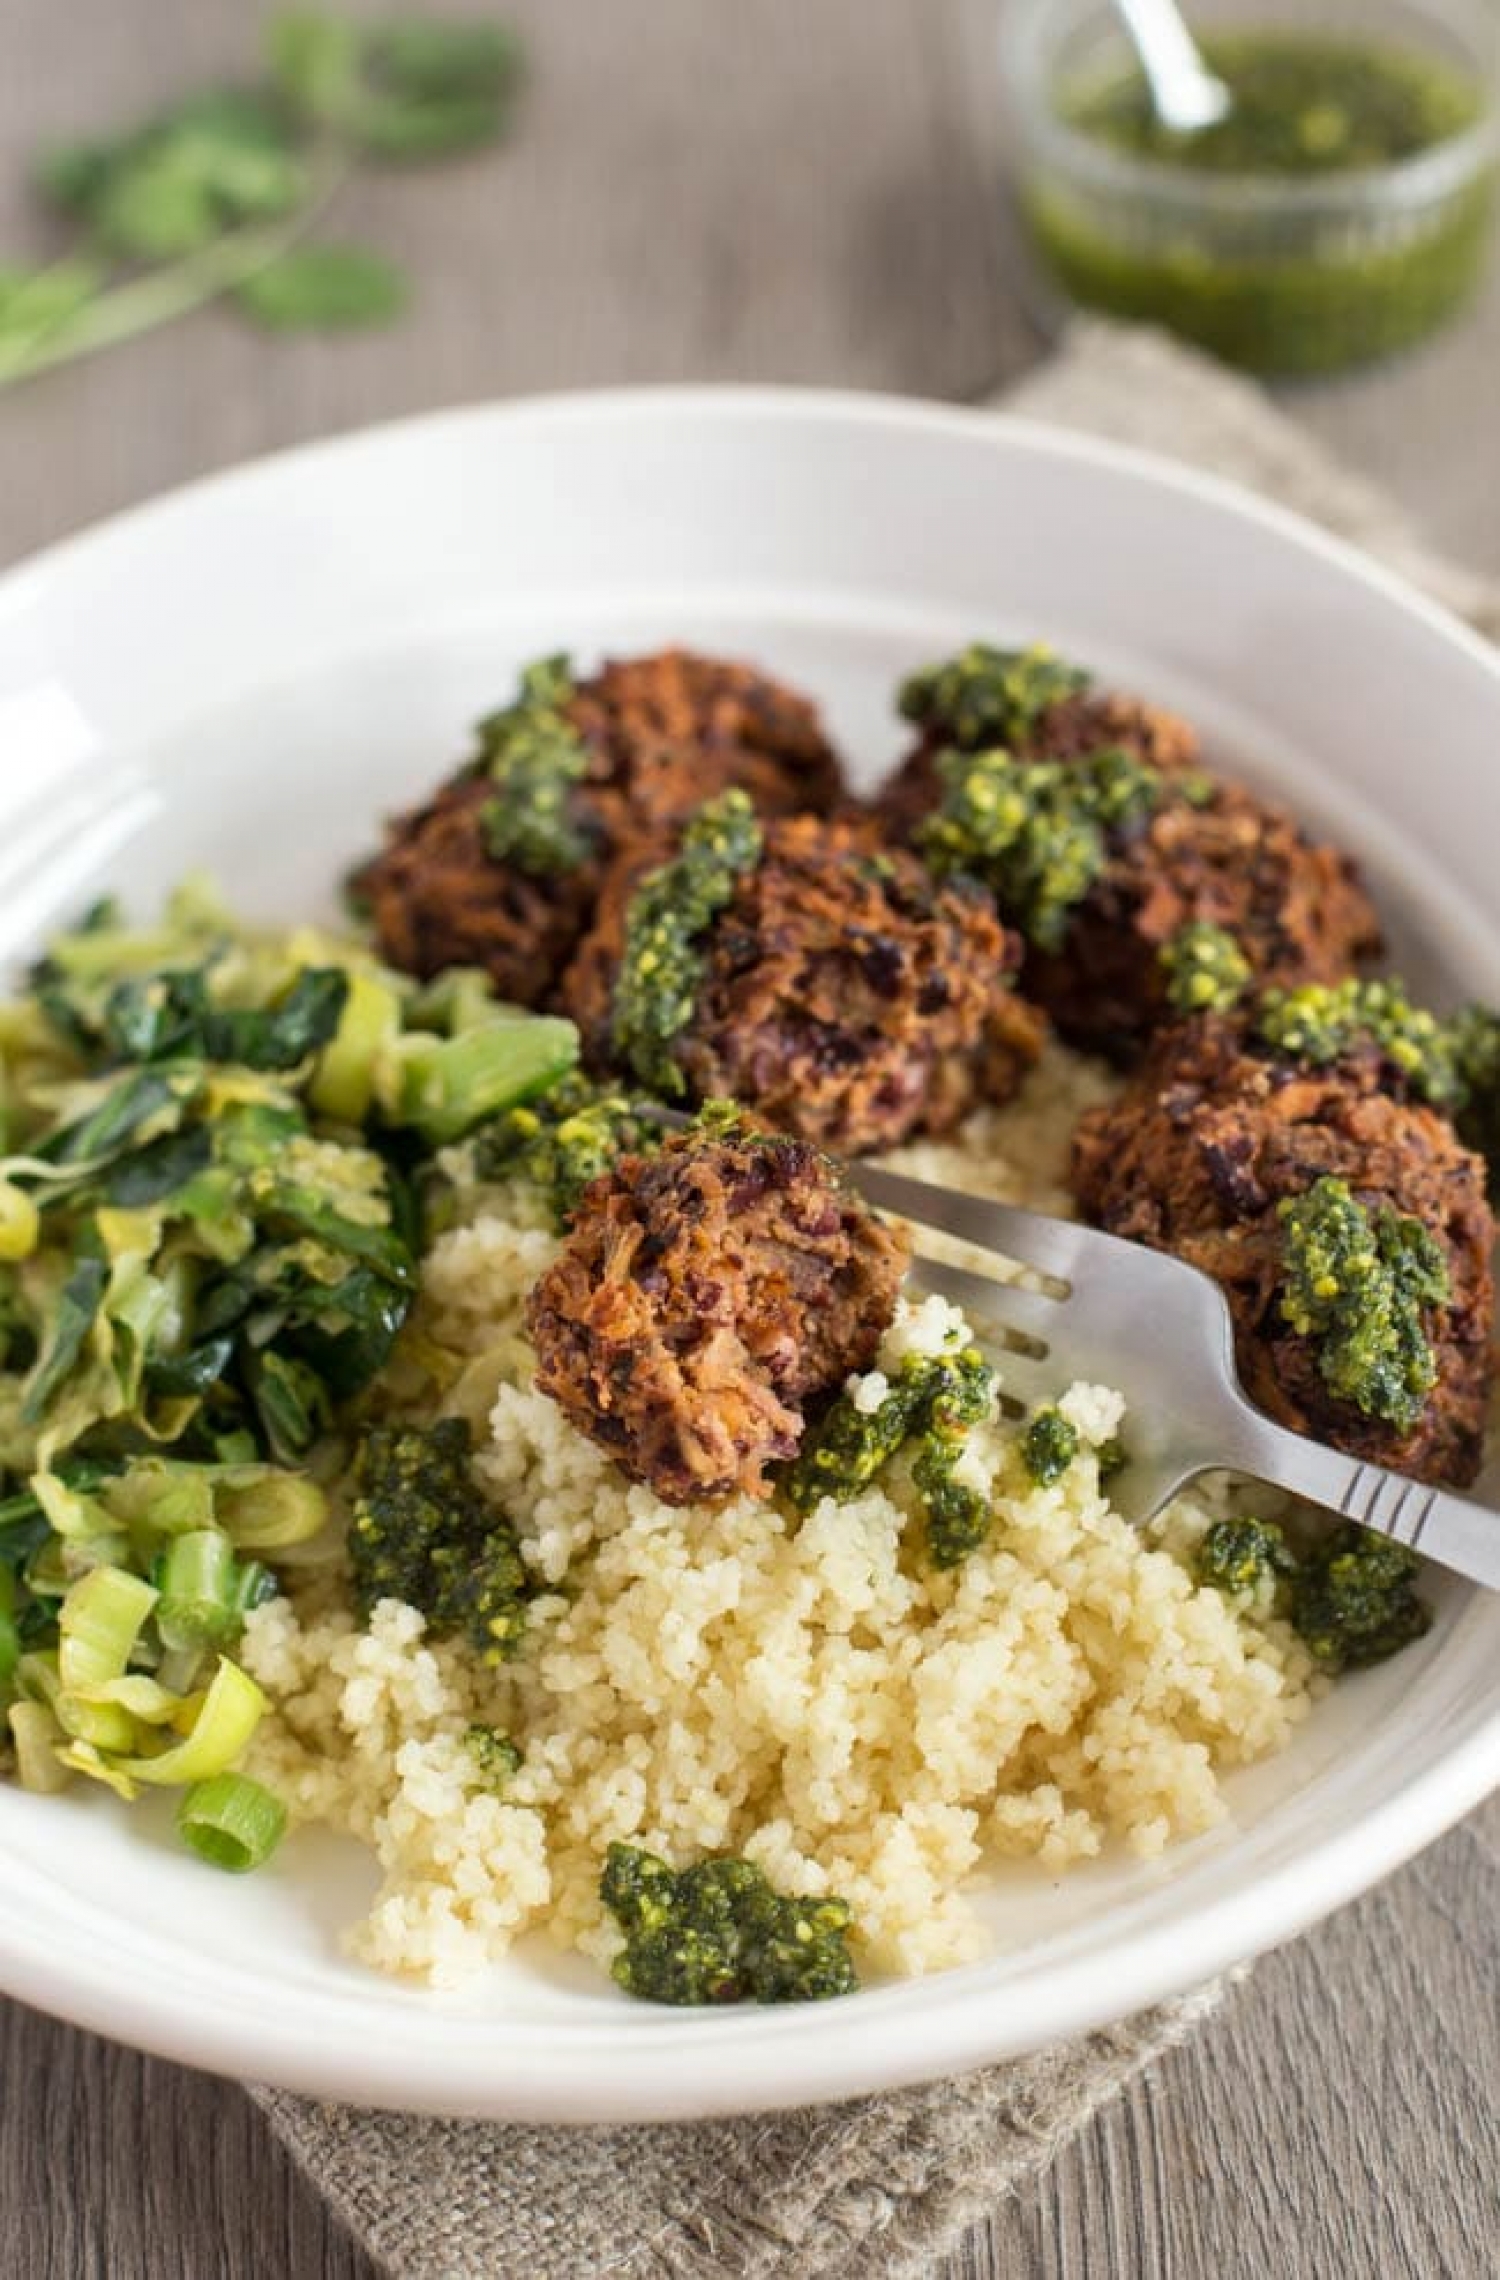 <p>Mushrooms and kidney beans unite to make these wonderfully crunchy, fiber-packed vegetarian kofta, served with a quick multi-herb pesto and whatever side you desire. <a href="https://www.easycheesyvegetarian.com/mushroom-kidney-bean-koftas/" rel="noopener">Get the recipe here.</a></p>